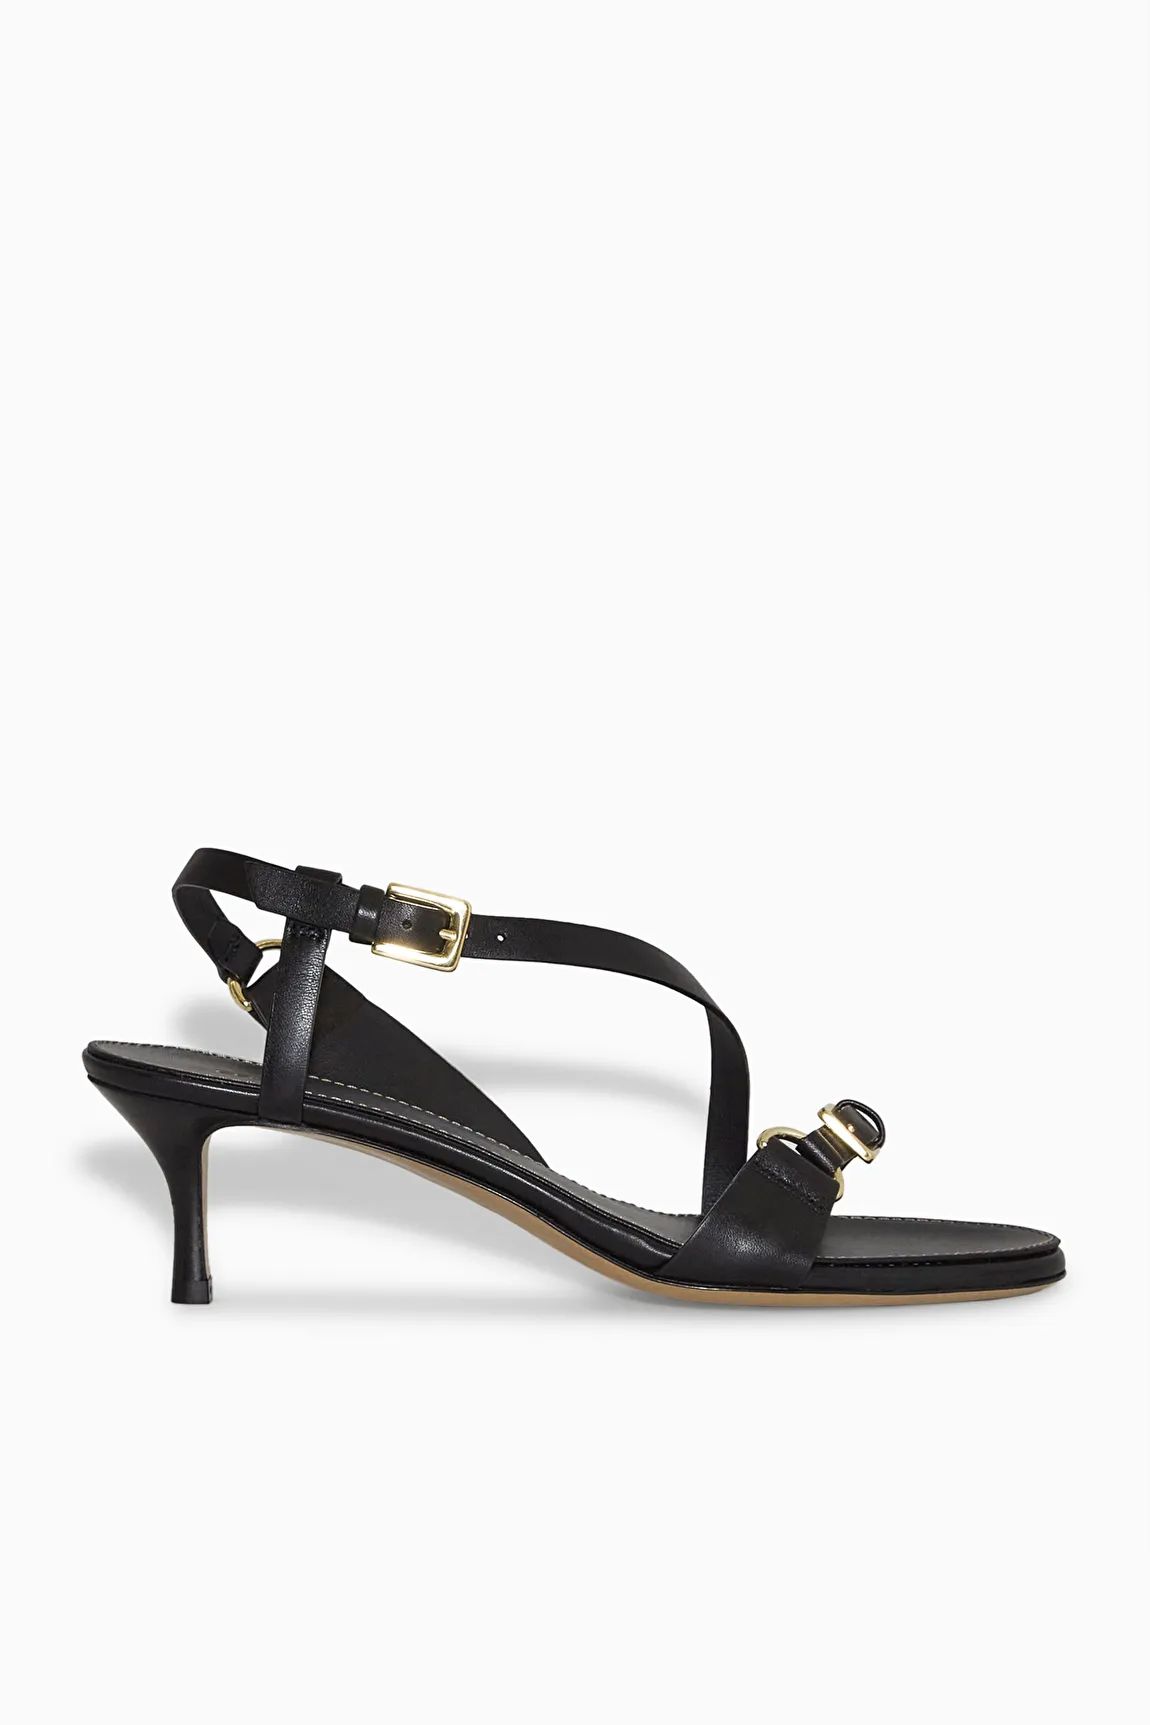 BUCKLED STRAPPY HEELED SANDALS - BLACK - COS | COS UK